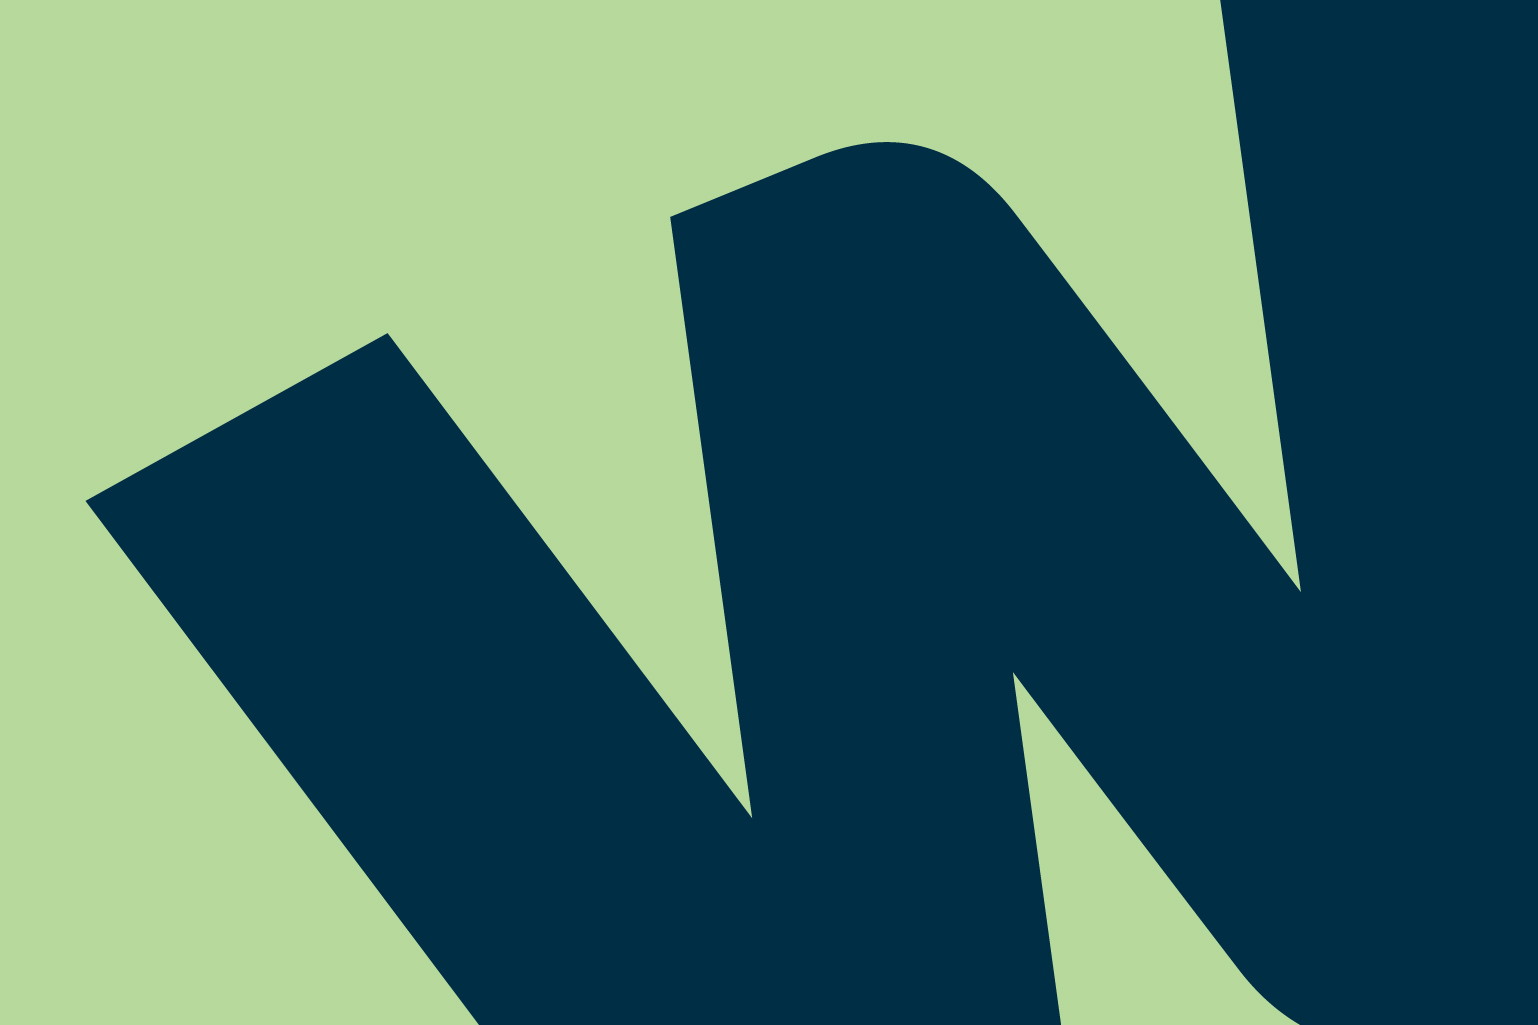 A blue letter W against a green background.